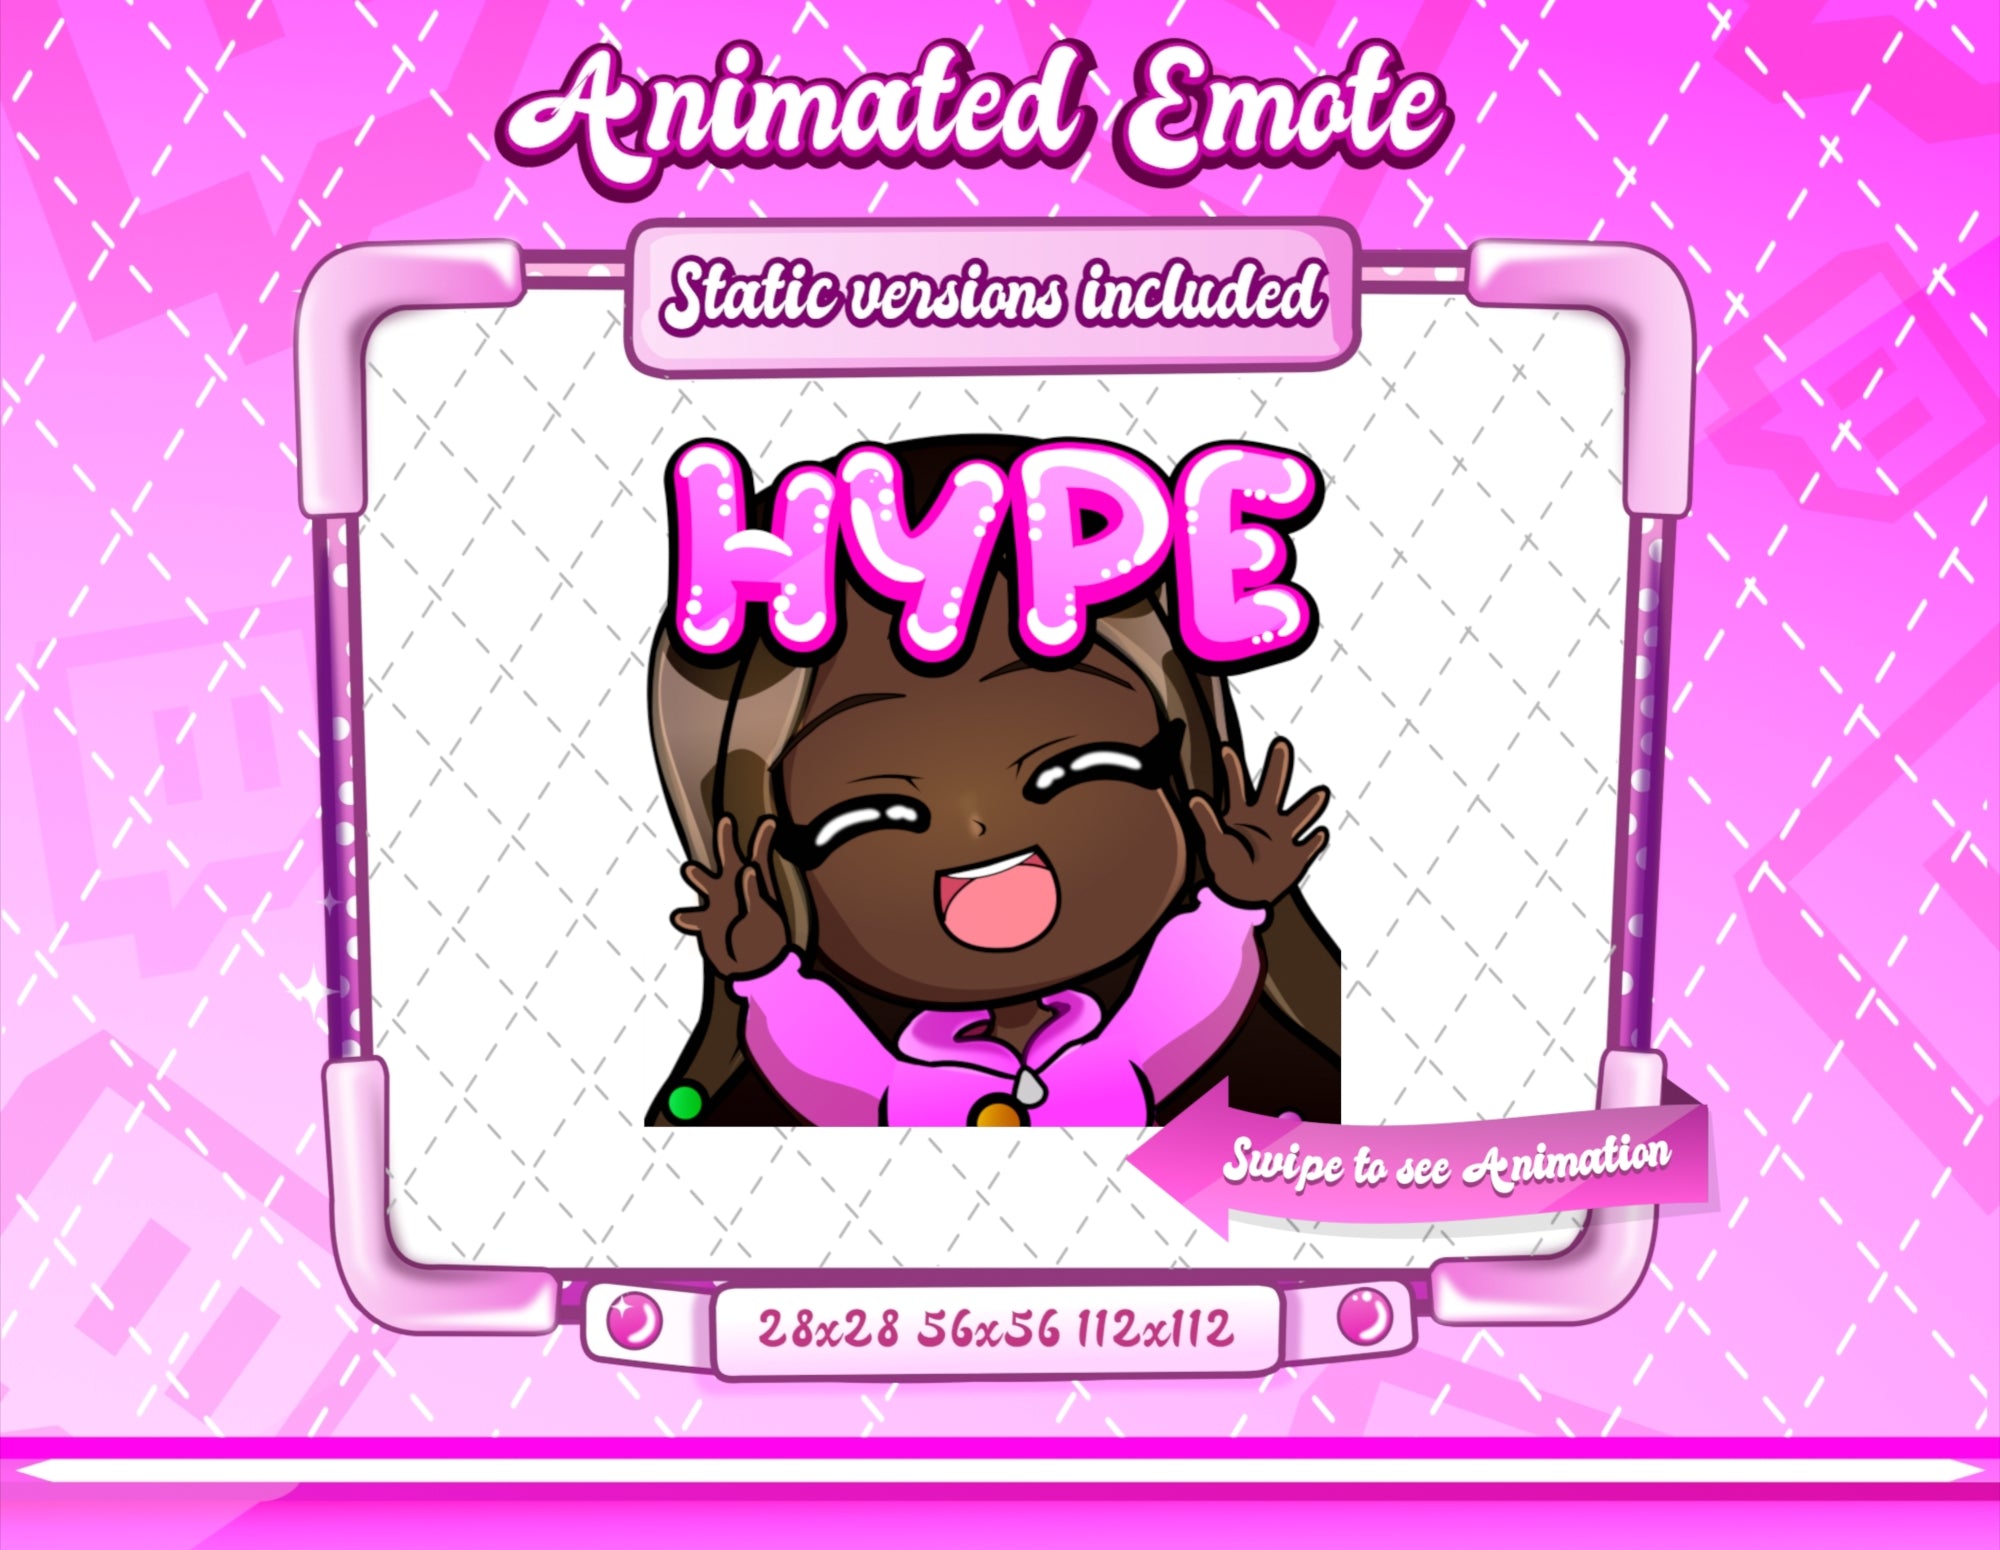 Arek_design: I will create custom emotes with chibi style for your channel  for $10 on fiverr.com | Anime, Chibi, Cute cartoon wallpapers